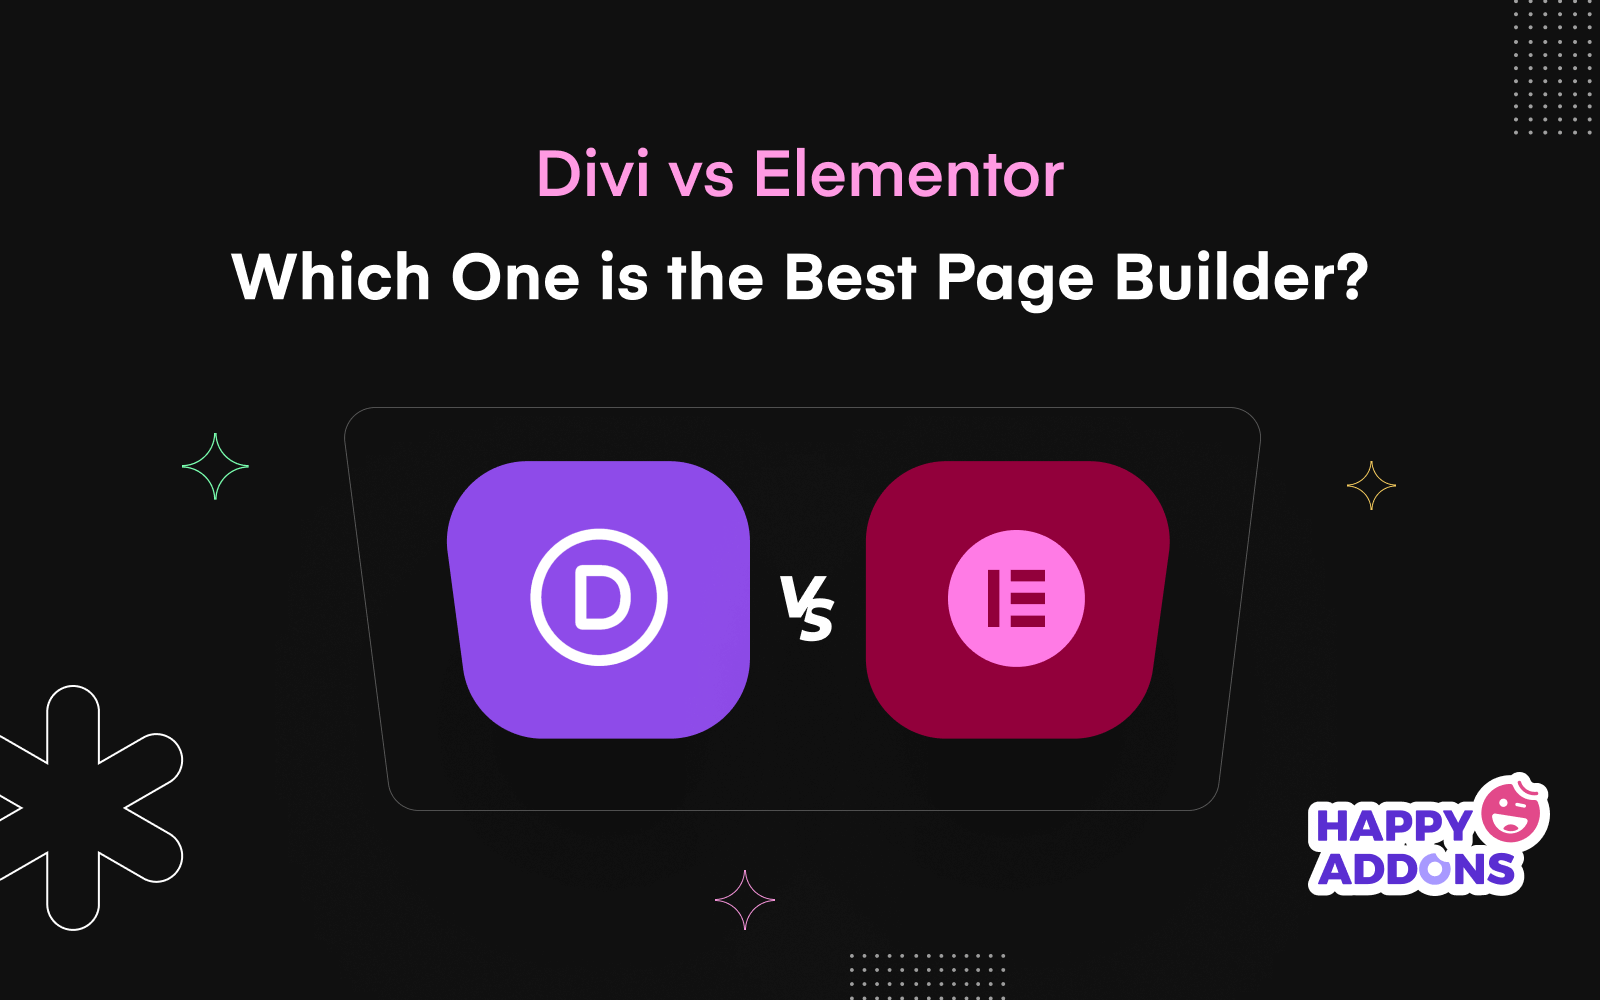 Divi vs Elementor: Which One is the Best Page Builder